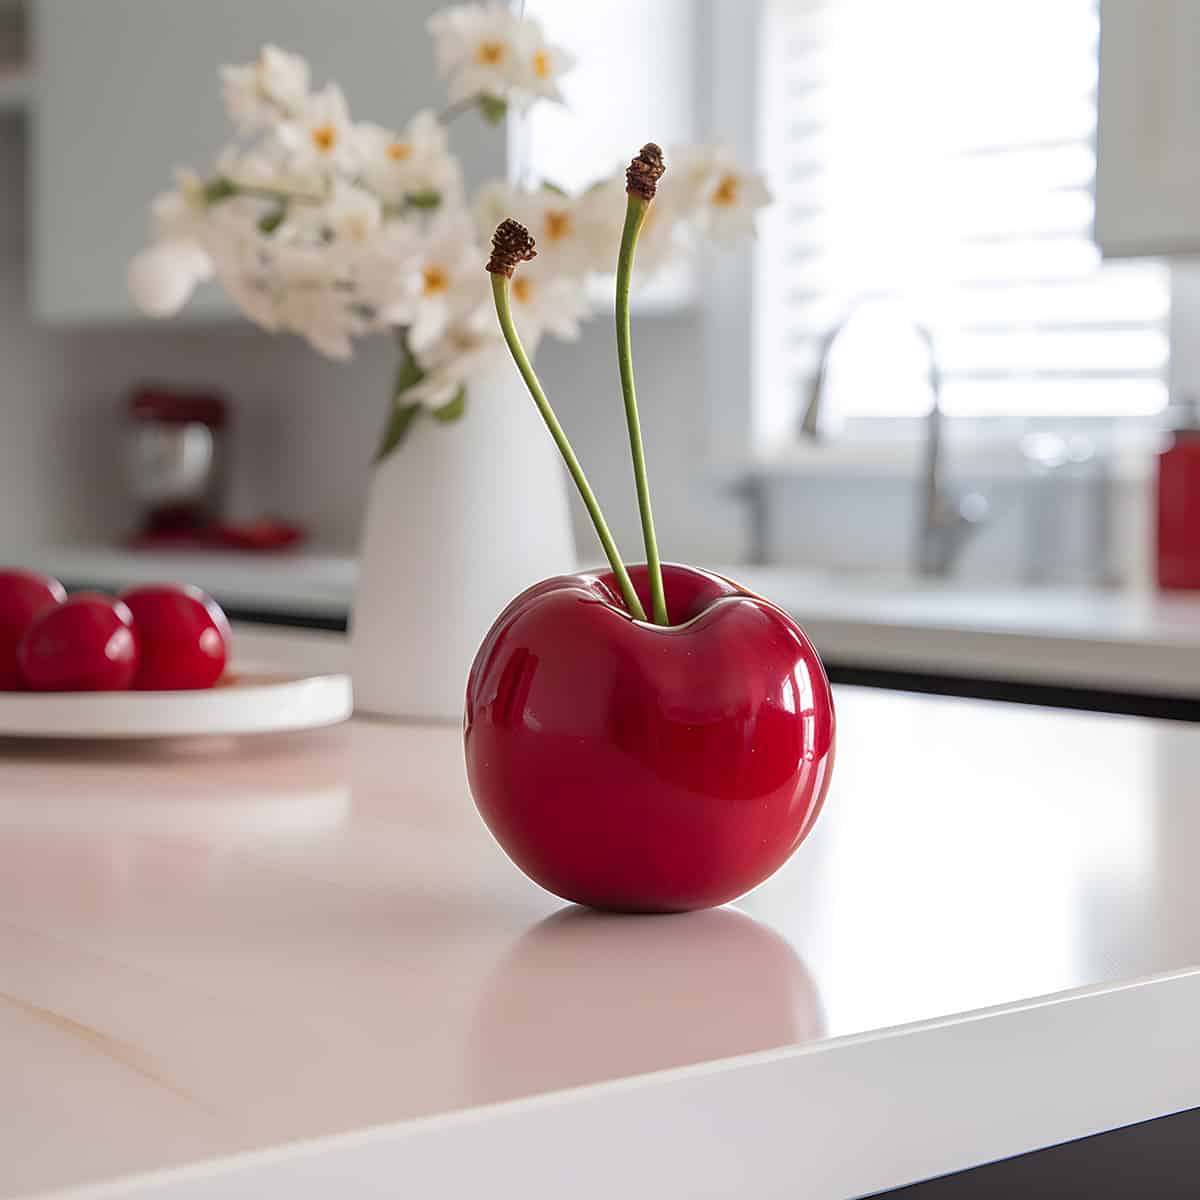 Fuji Cherries on a kitchen counter